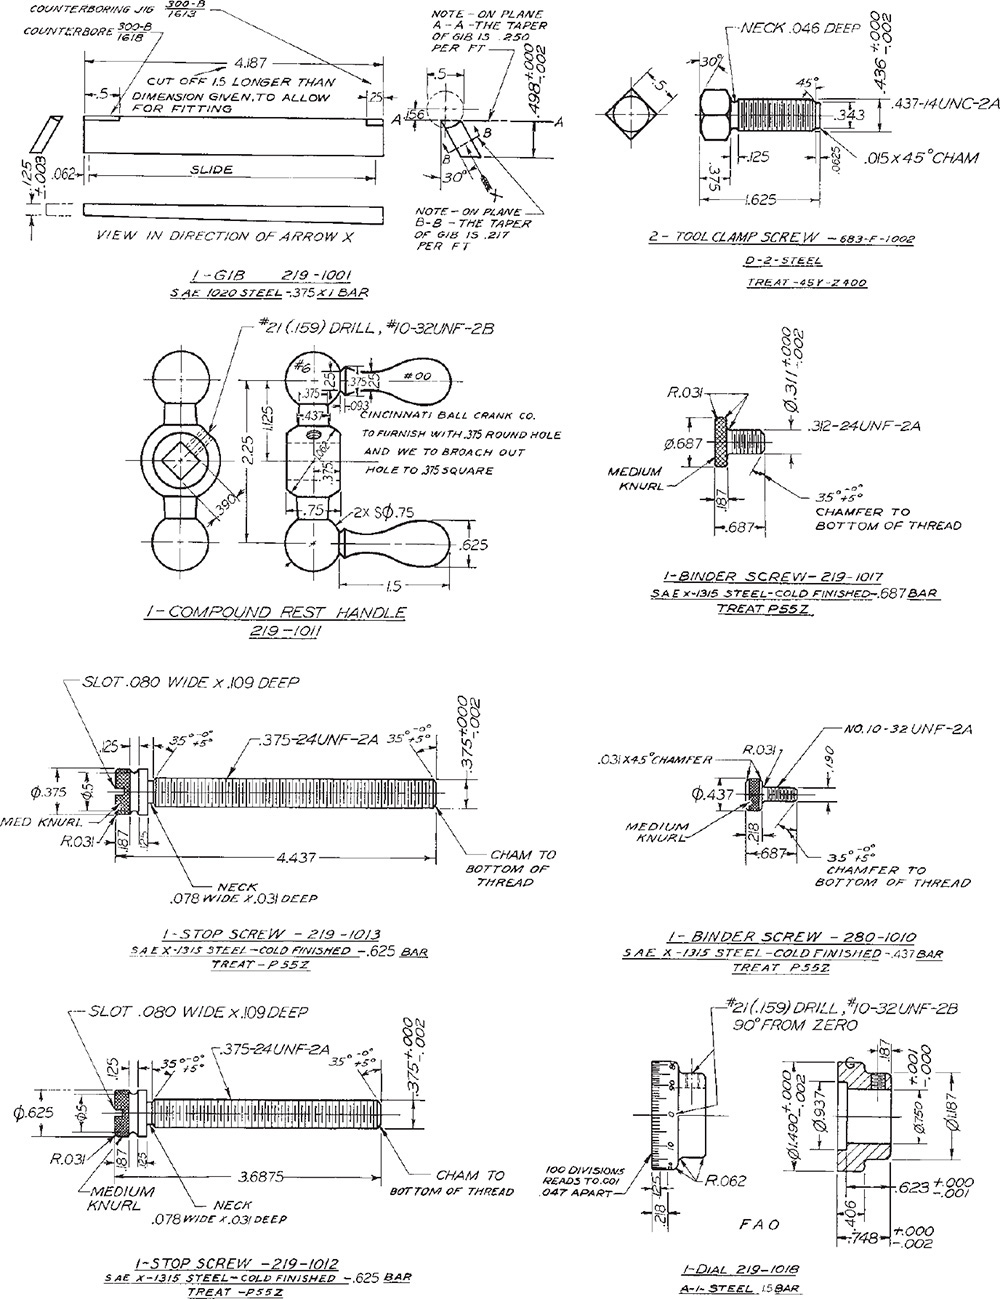 Drawings show the various sections of a slide tool.